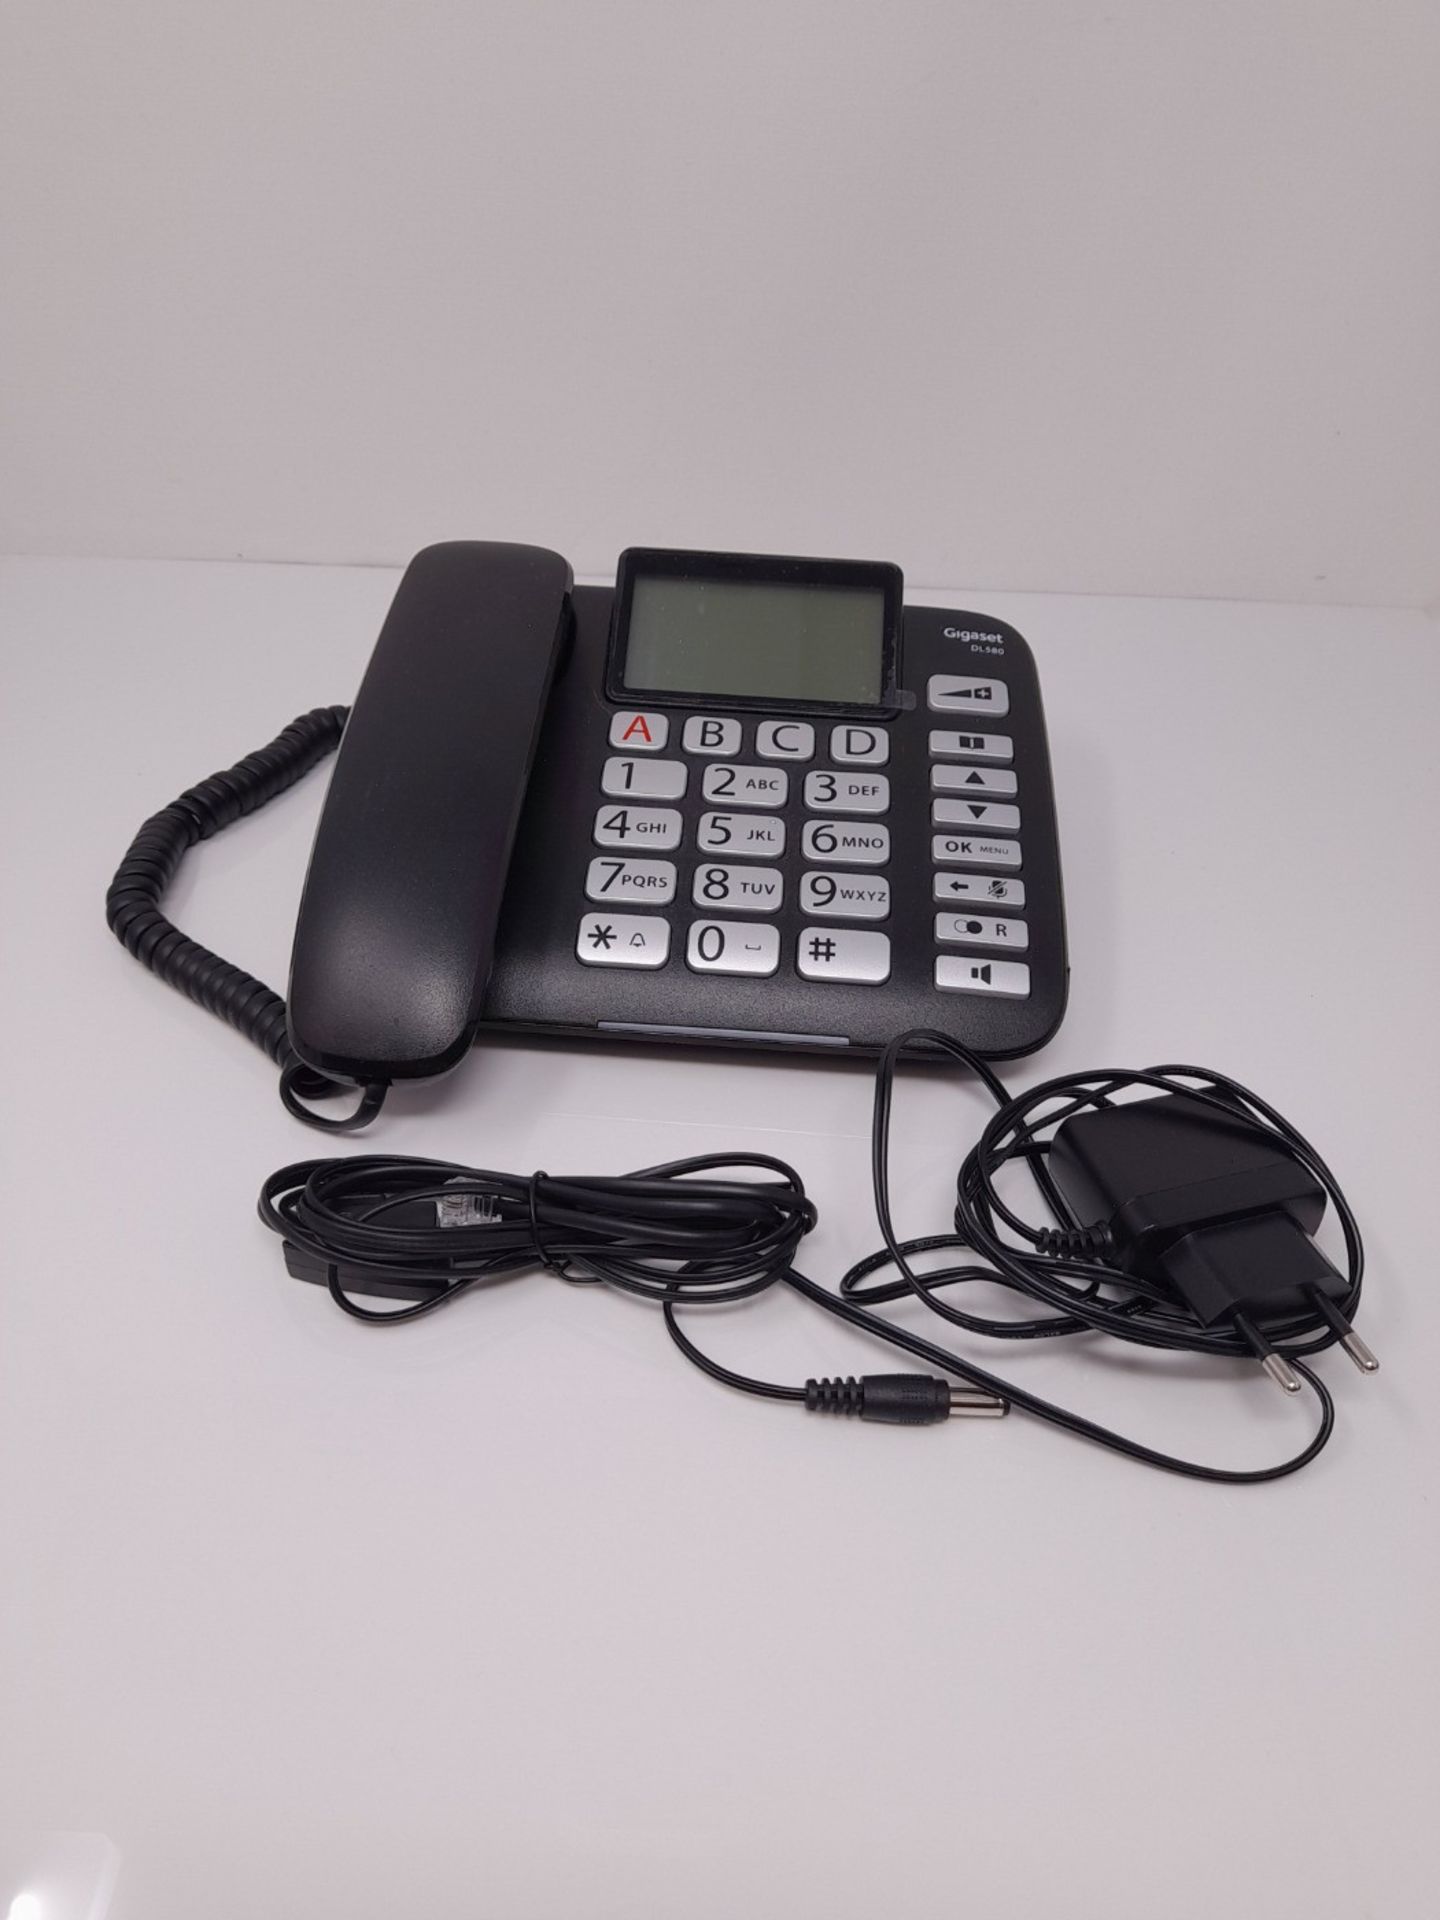 Gigaset DL580 - corded senior telephone - desk telephone with extra easy operation and - Image 2 of 2